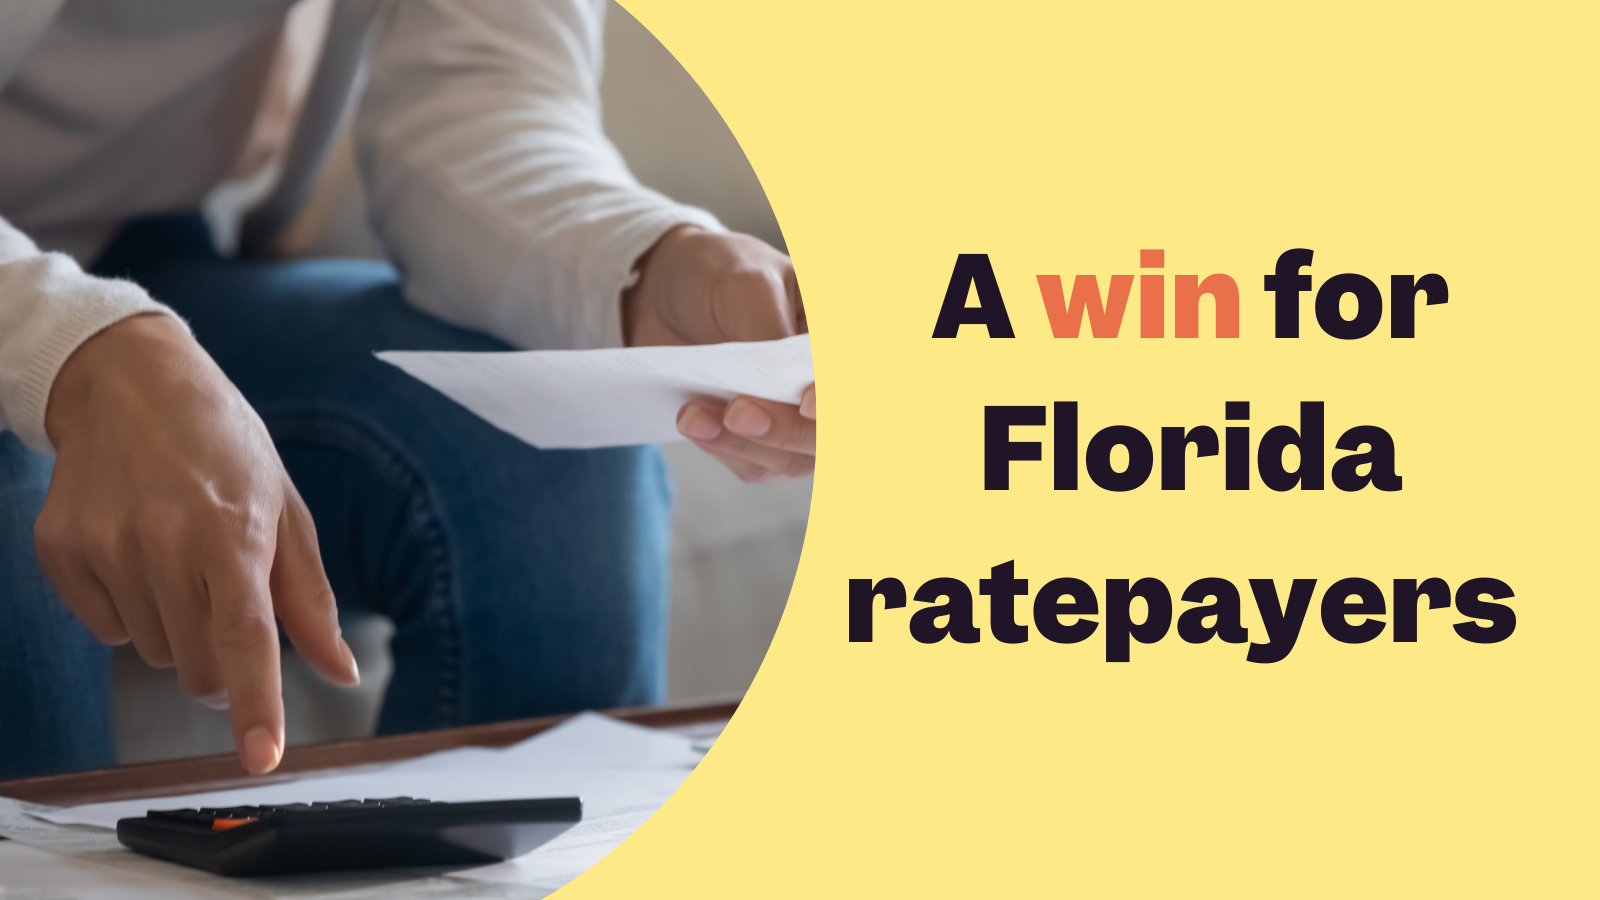 A win for Florida ratepayers as Florida Power & Light withdraws extreme proposal